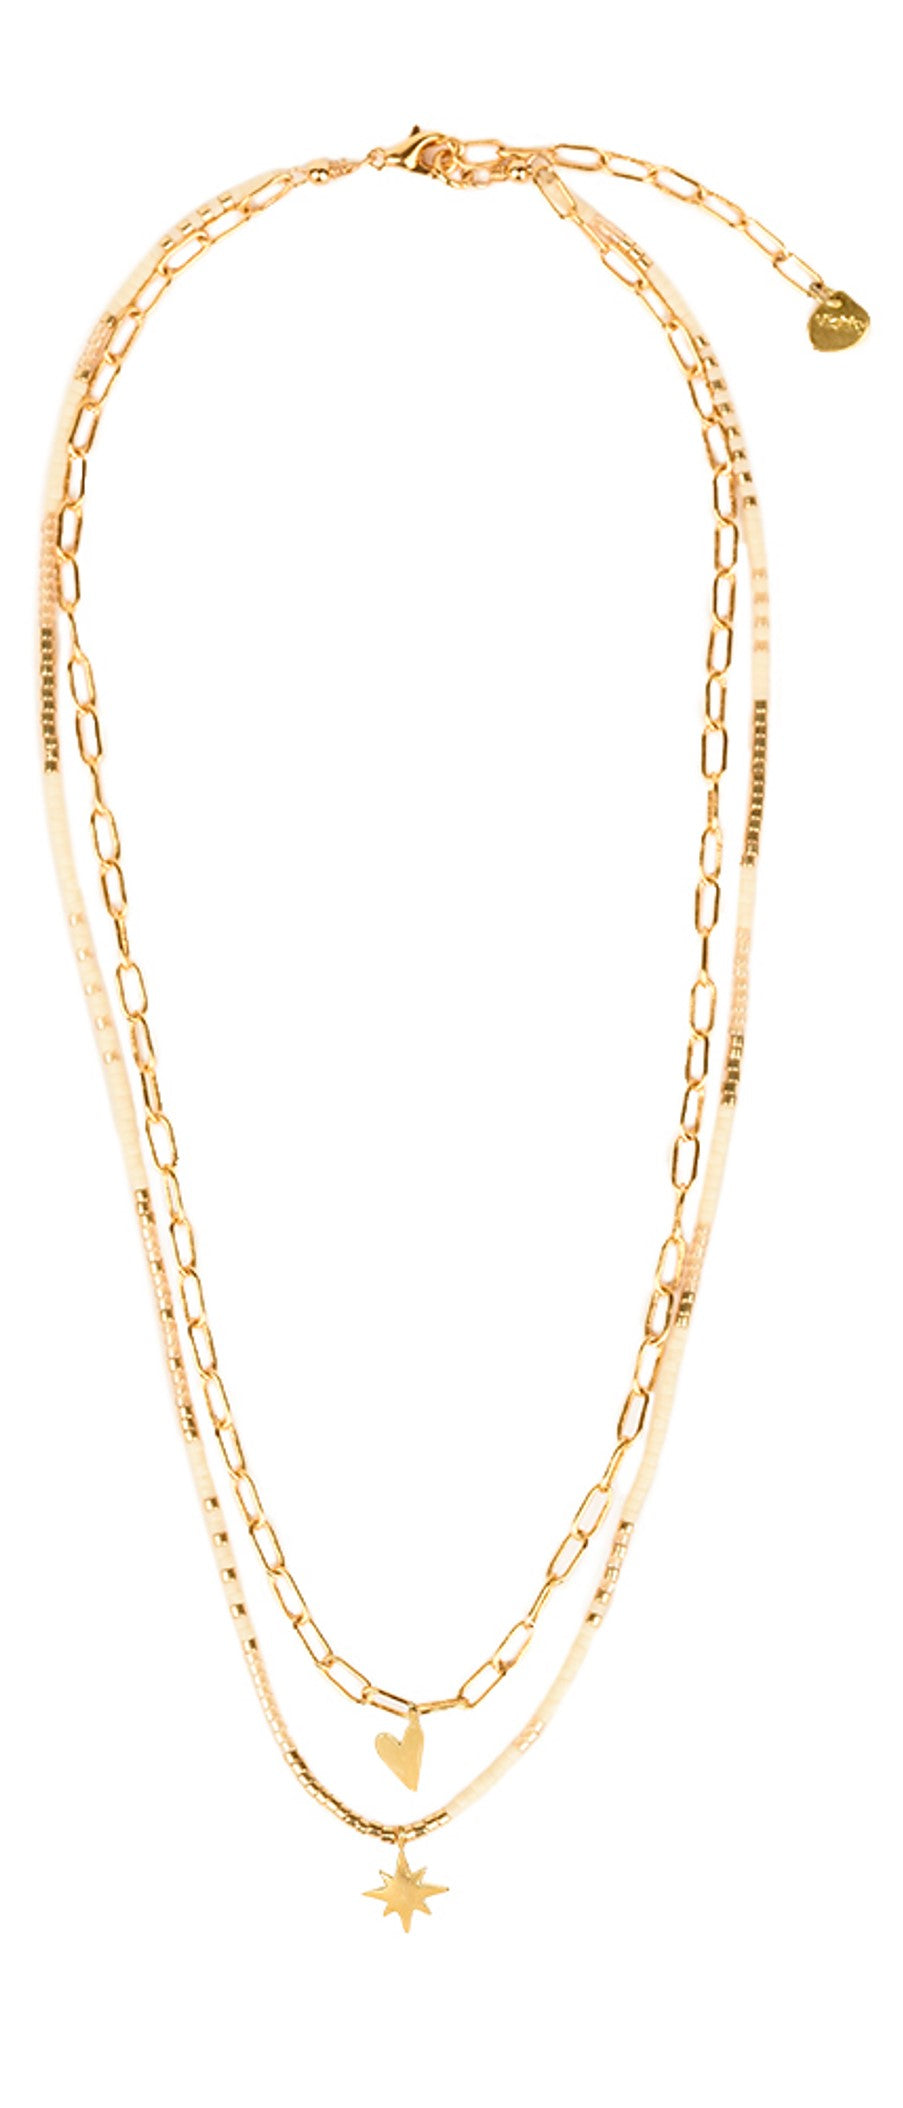 Double layer necklace with beading and a chain in gold and cream 